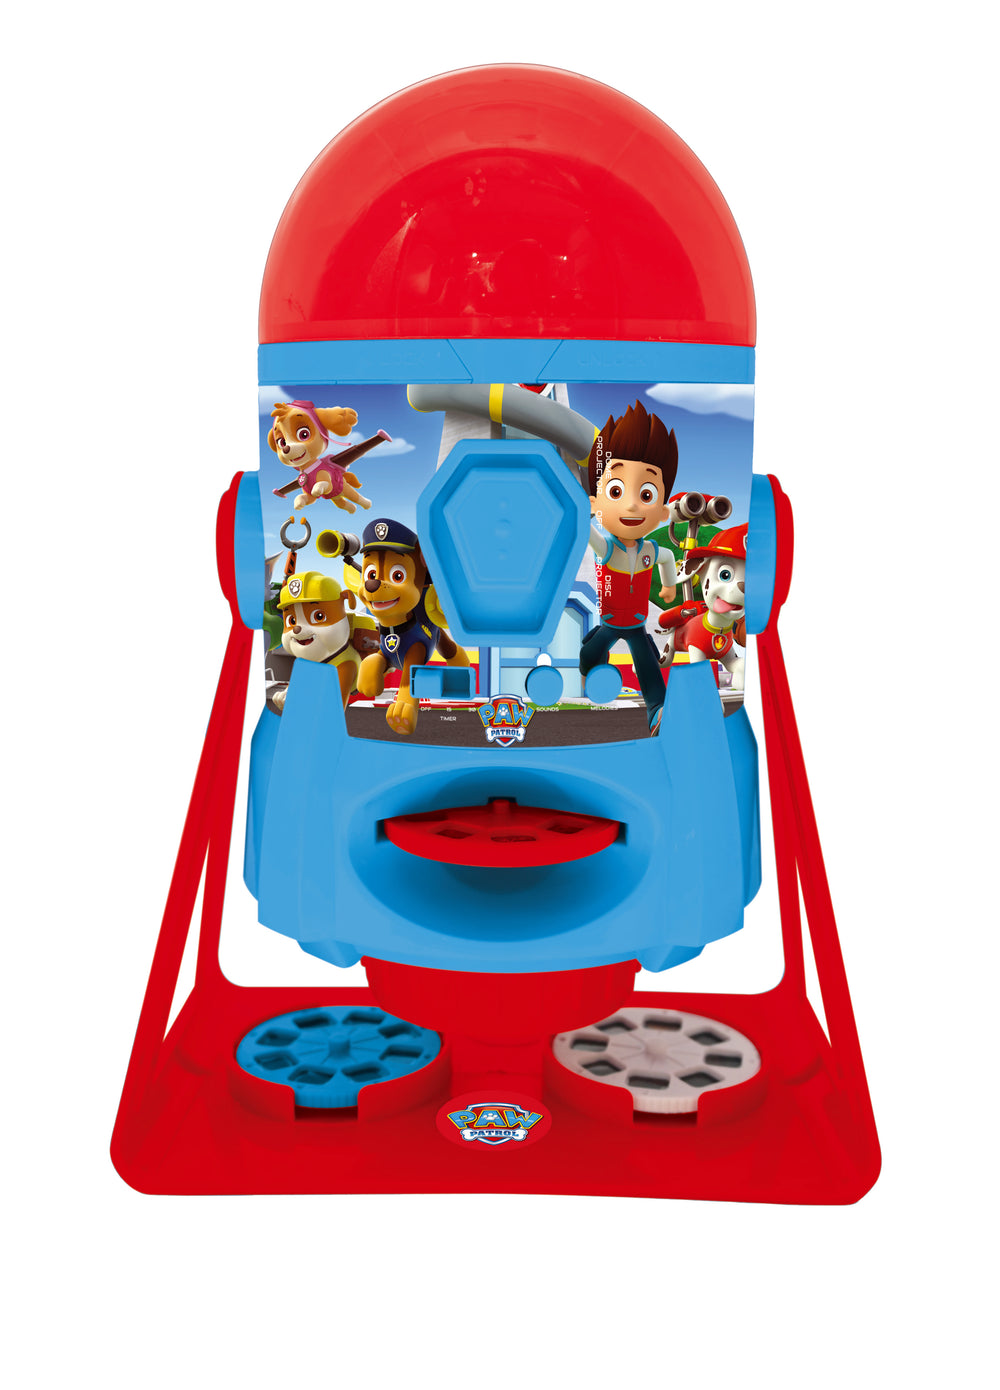 Paw Patrol 2-in-1 Story Creator Projector with Sounds and Activities